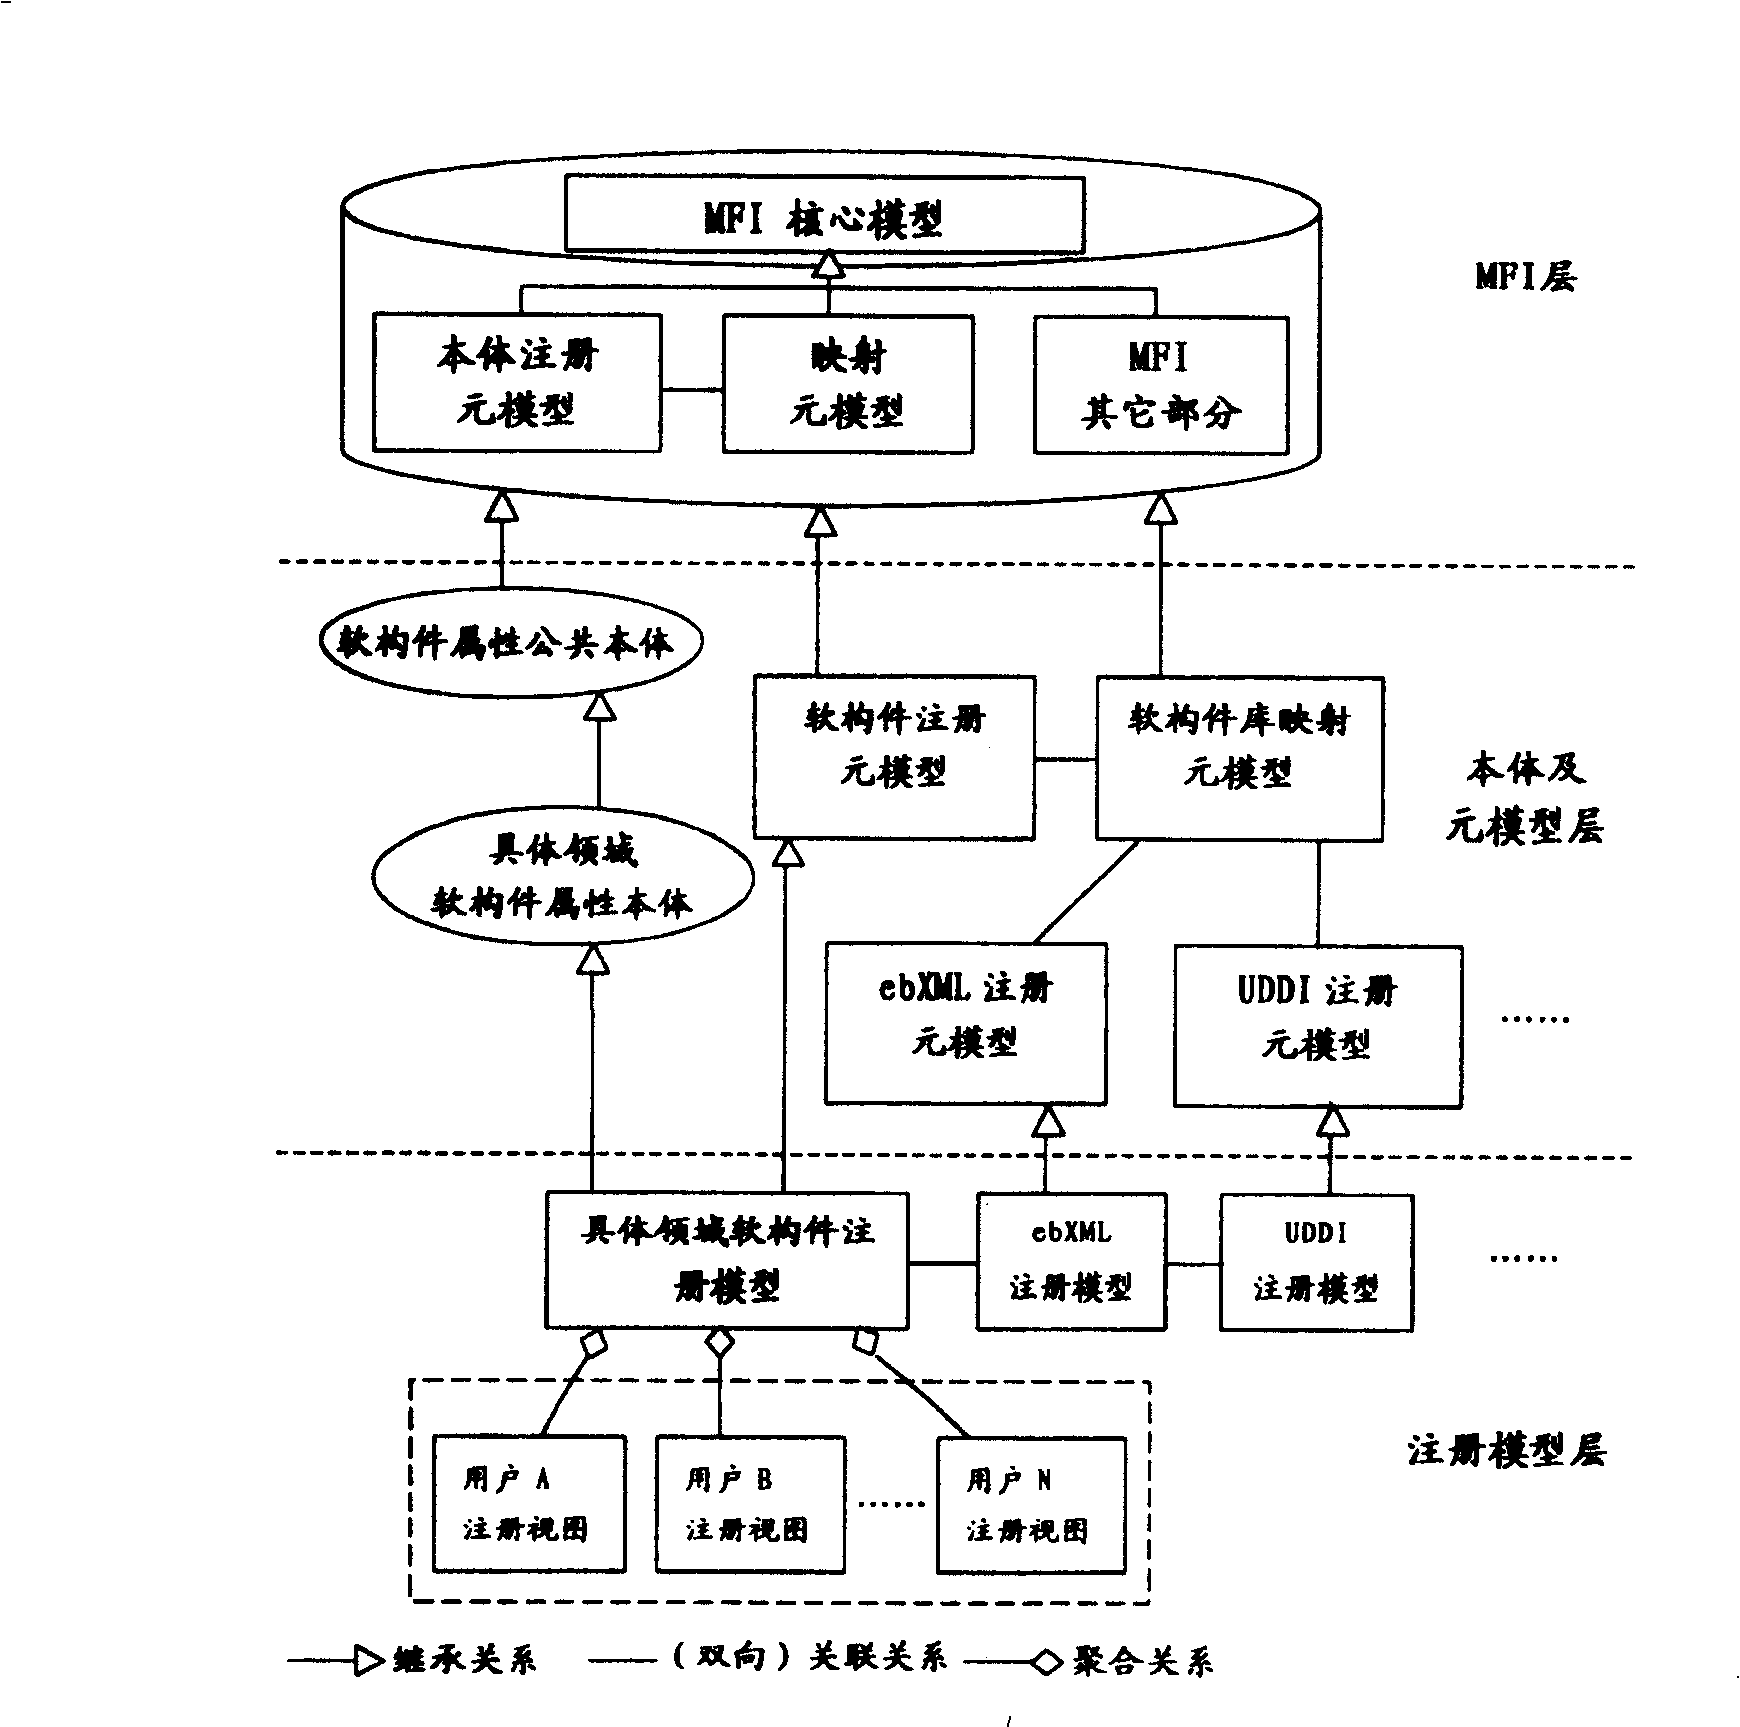 Software component classification registration method based on domain body